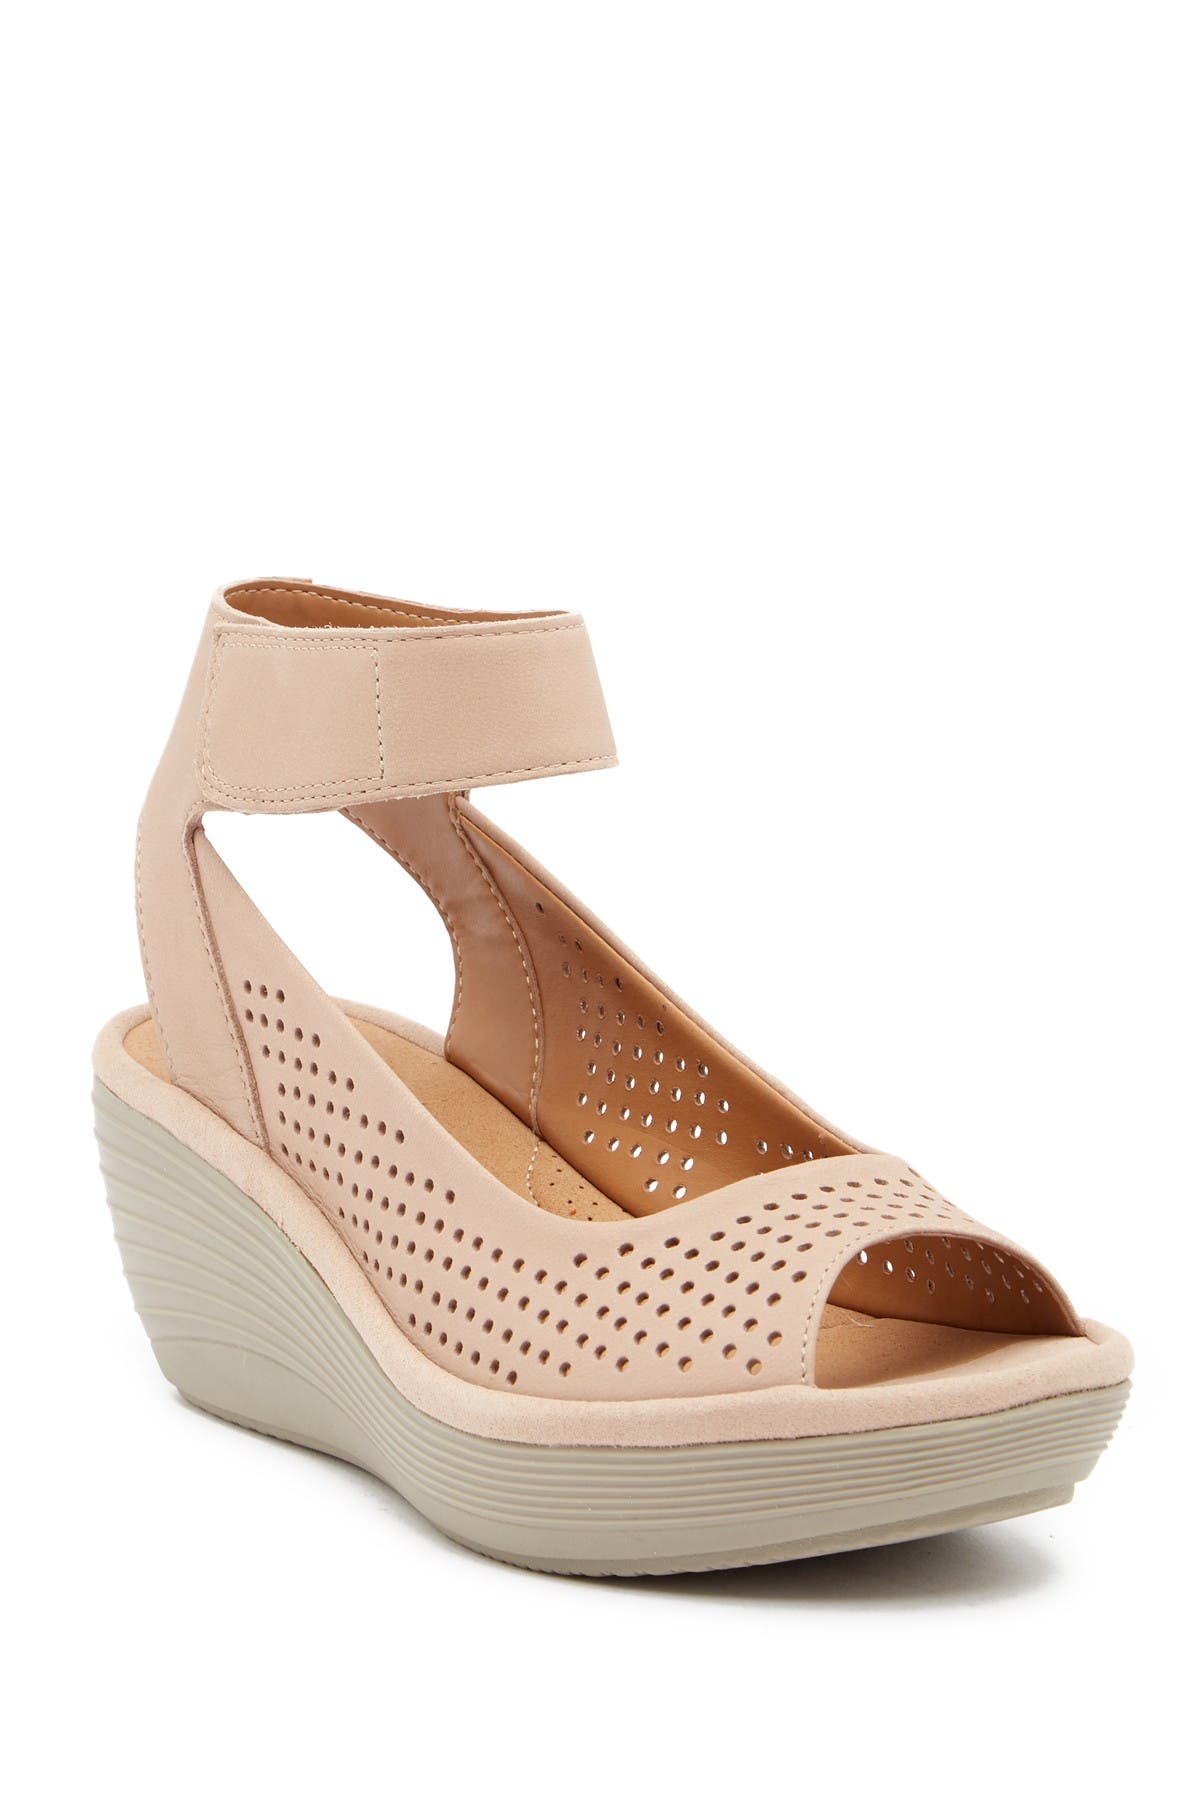 clarks reedly sandals